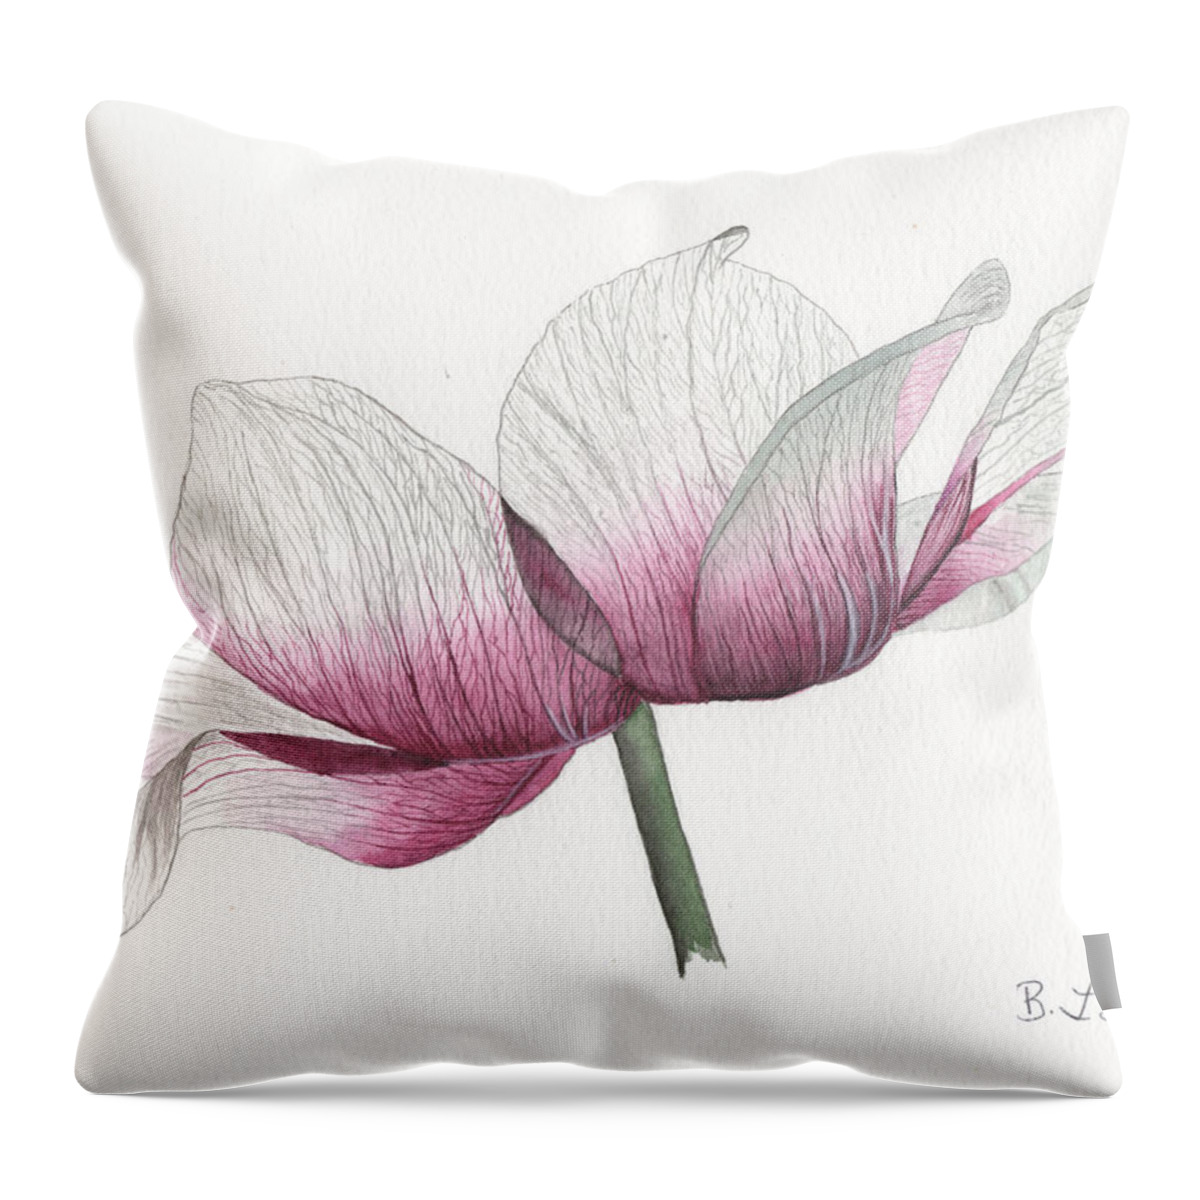 Anemone Throw Pillow featuring the painting Anemone by Bob Labno